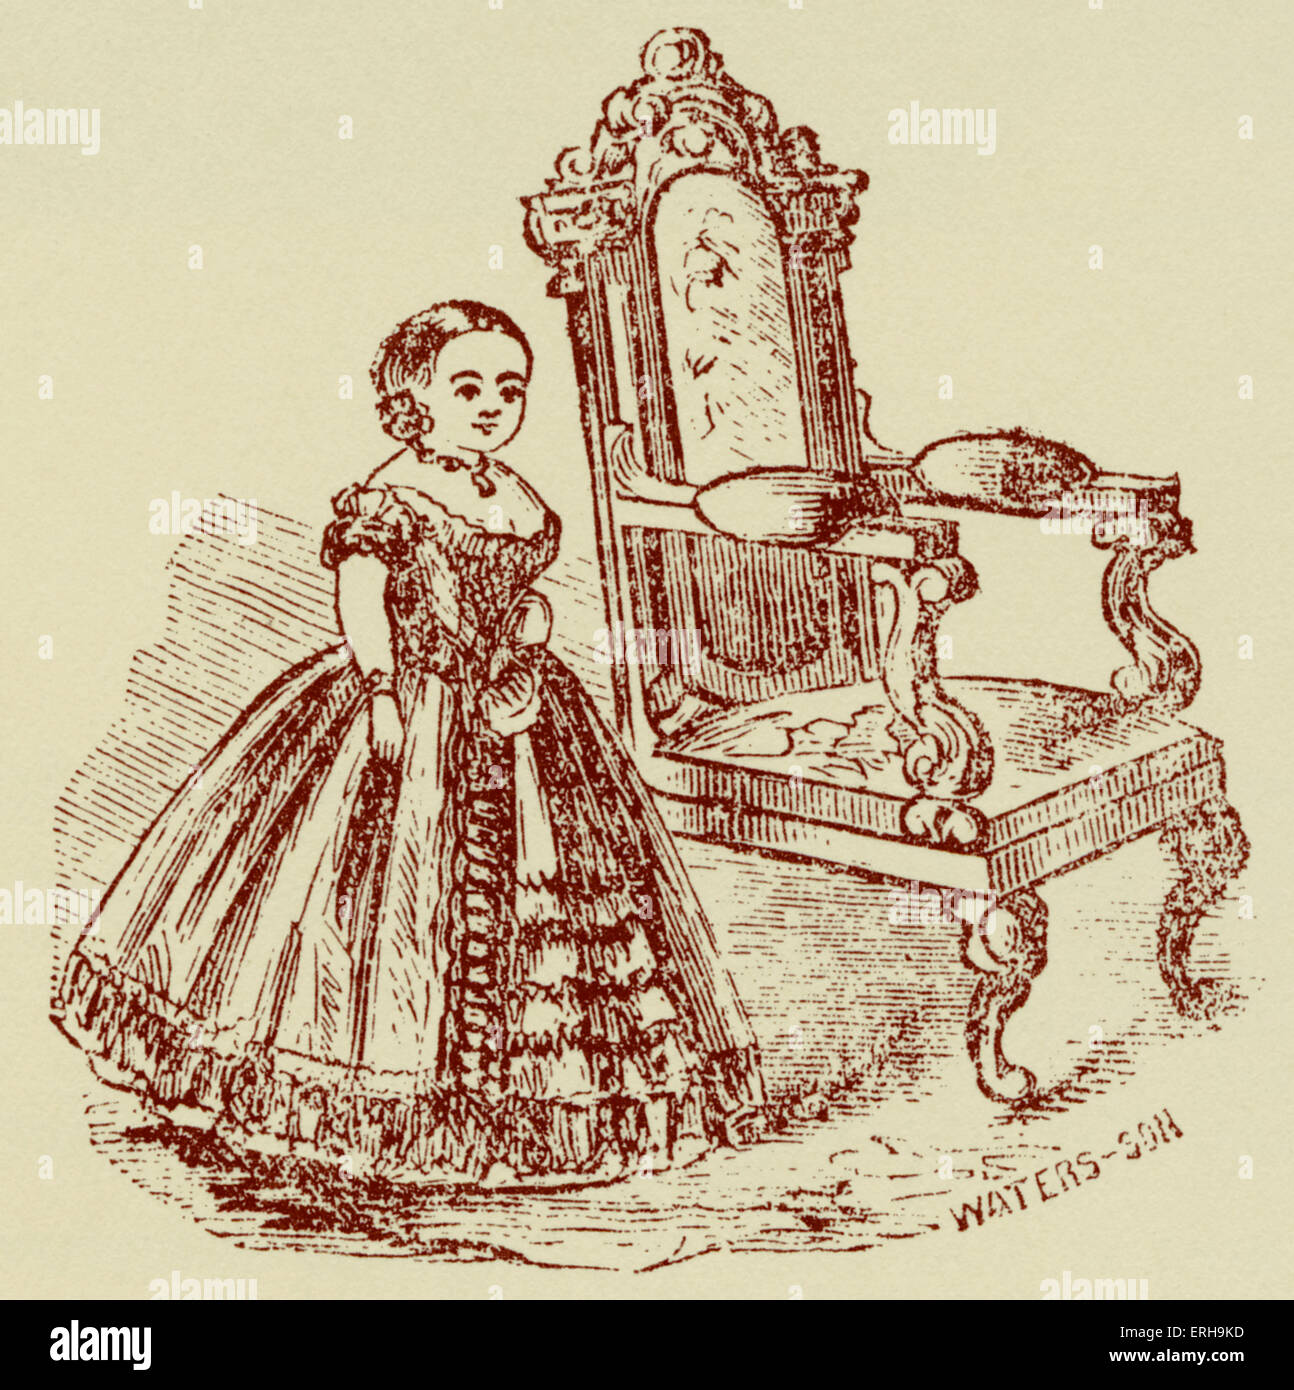 Barnum's American Museum advertisement for marriage of professional sideshow attractions Miss Lavinia Warren, the 'Little Queen of Beauty', and General Tom Thumb (Charles Sherwood Stratton). May 10, 1863. Artist unknown. Stock Photo